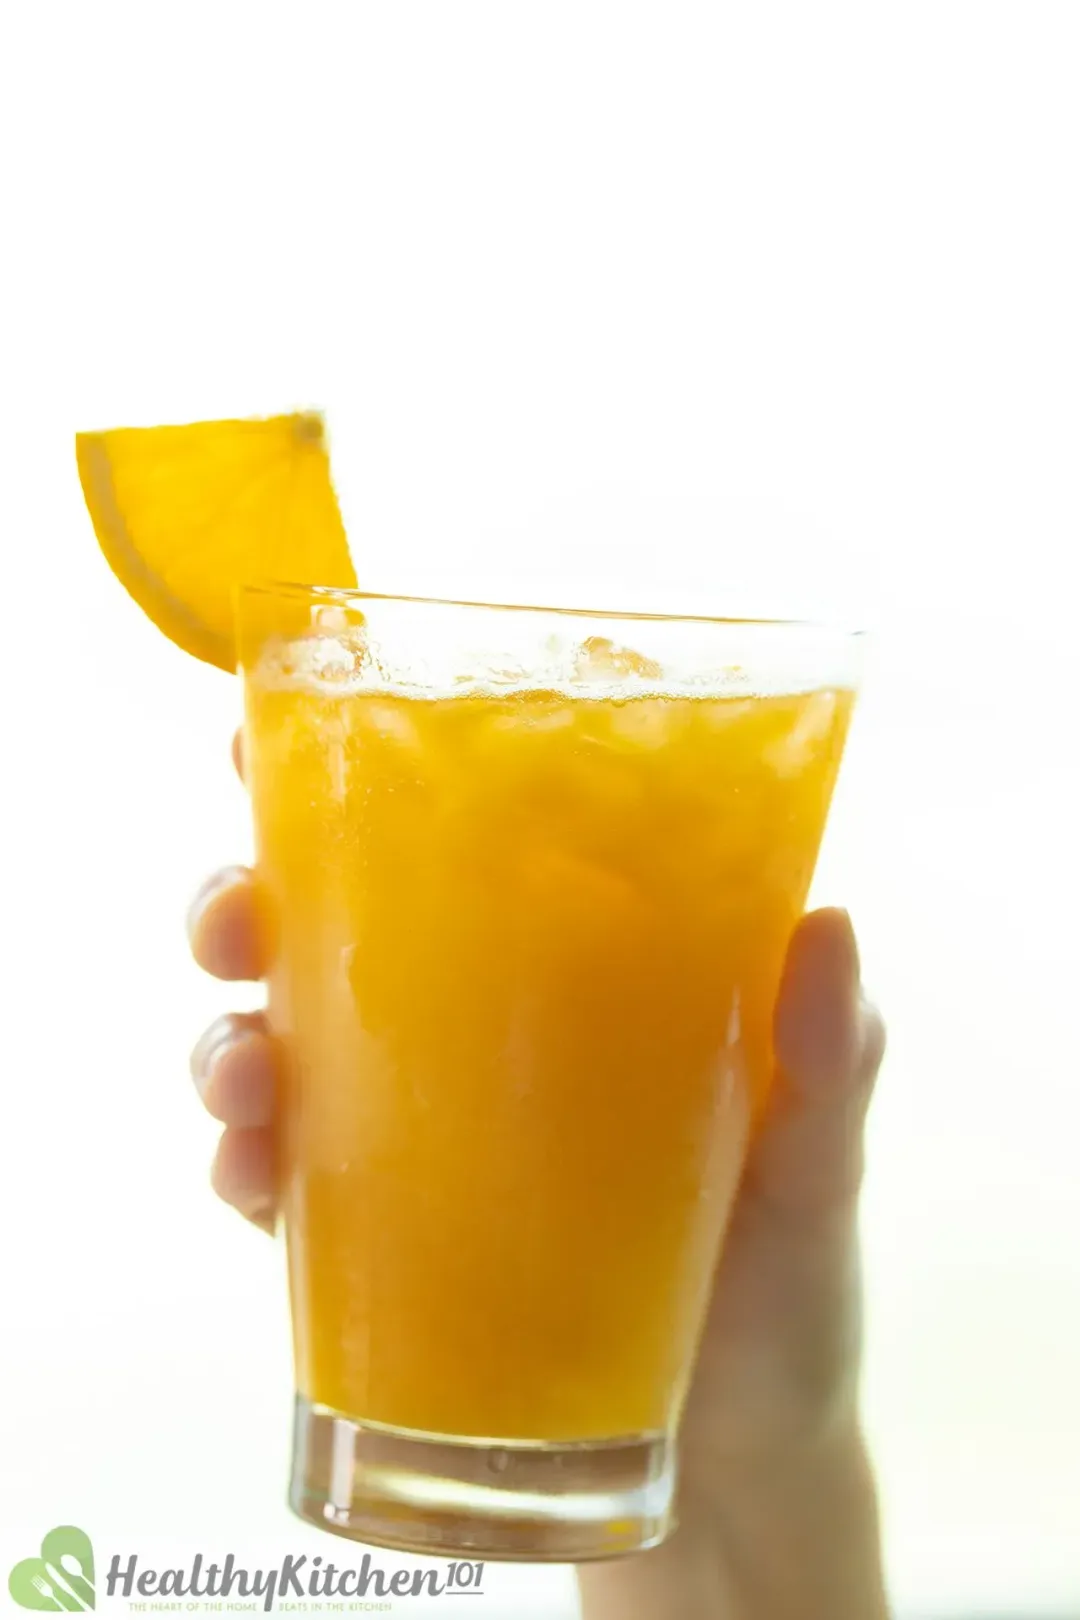 A hand holding an iced glass of orange juice